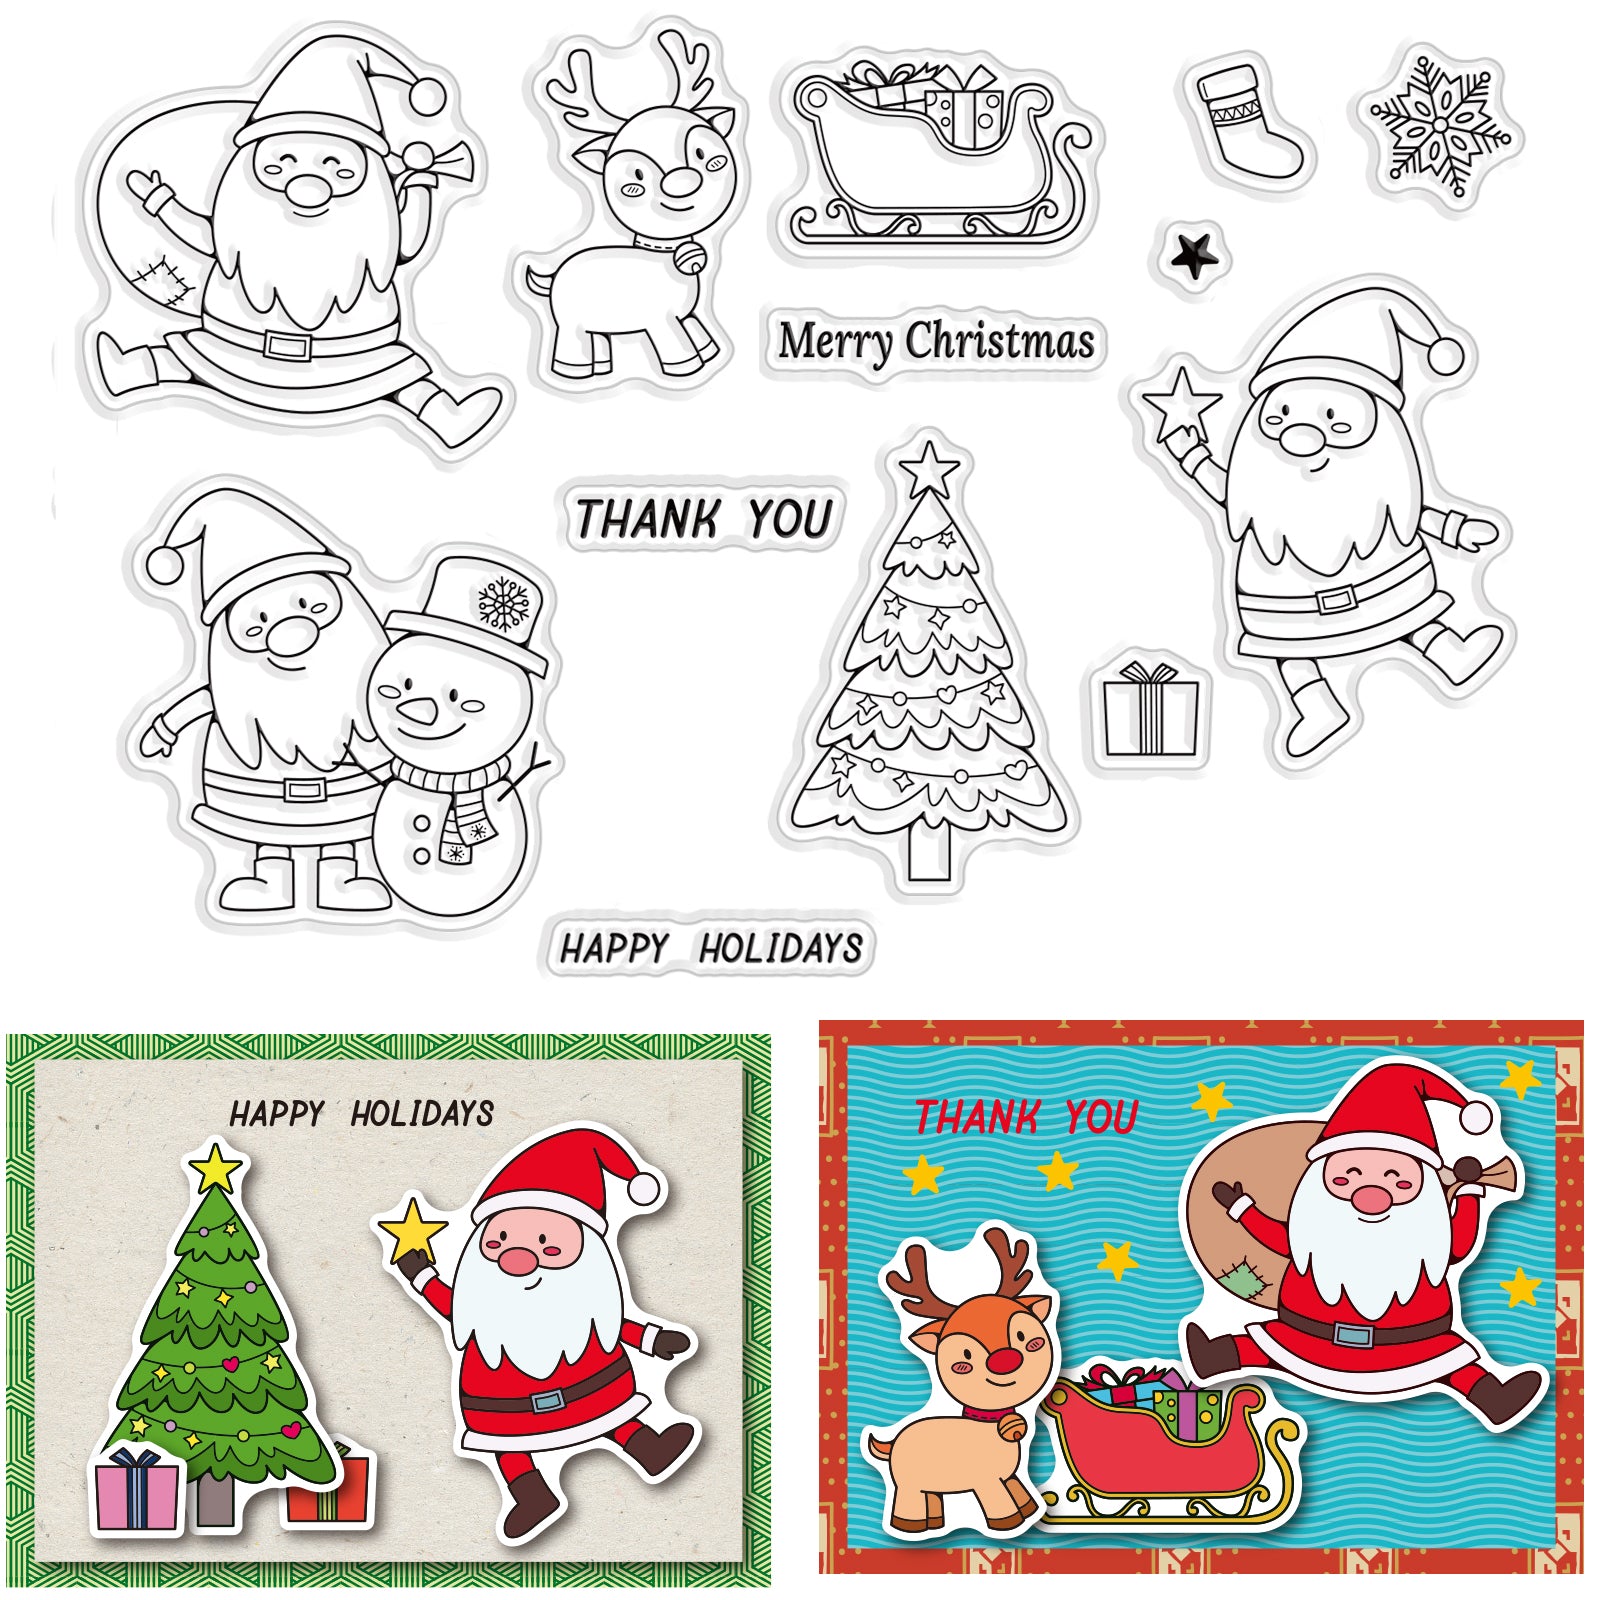 Christmas postage stamps with Santa Claus, Snowman, Deer